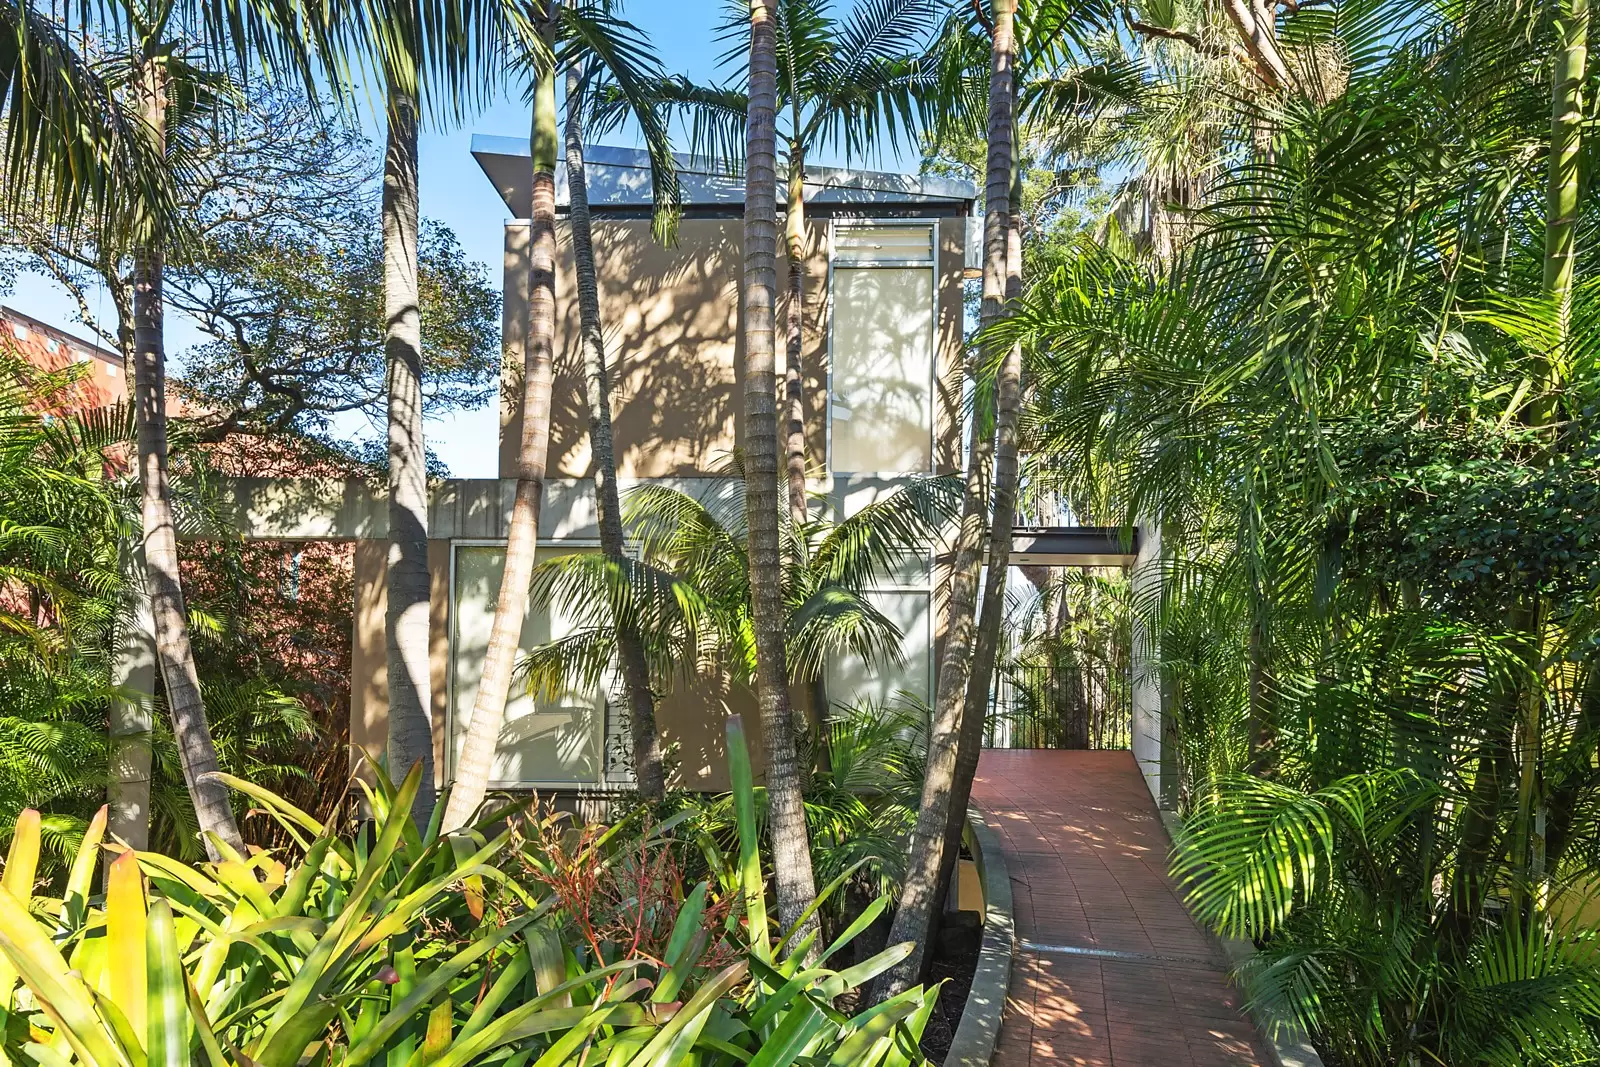 Photo #4: 42 Vaucluse Road, Vaucluse - Sold by Sydney Sotheby's International Realty